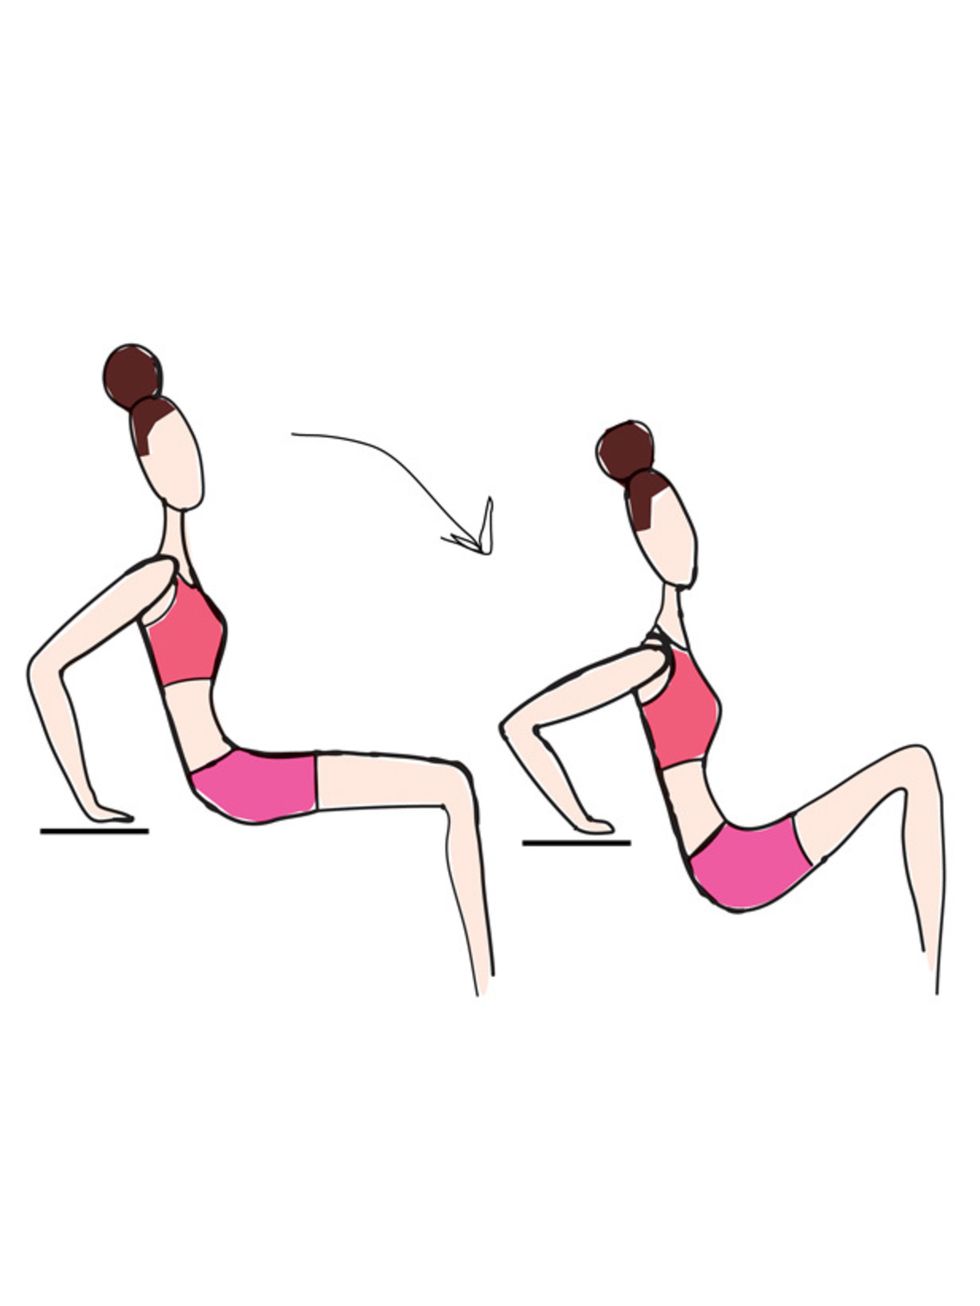 <p>Place your arms at a right angle and parallel to each other behind you. When you make the dip, make sure your core stays firm and your arms are working throughout the movement.</p>